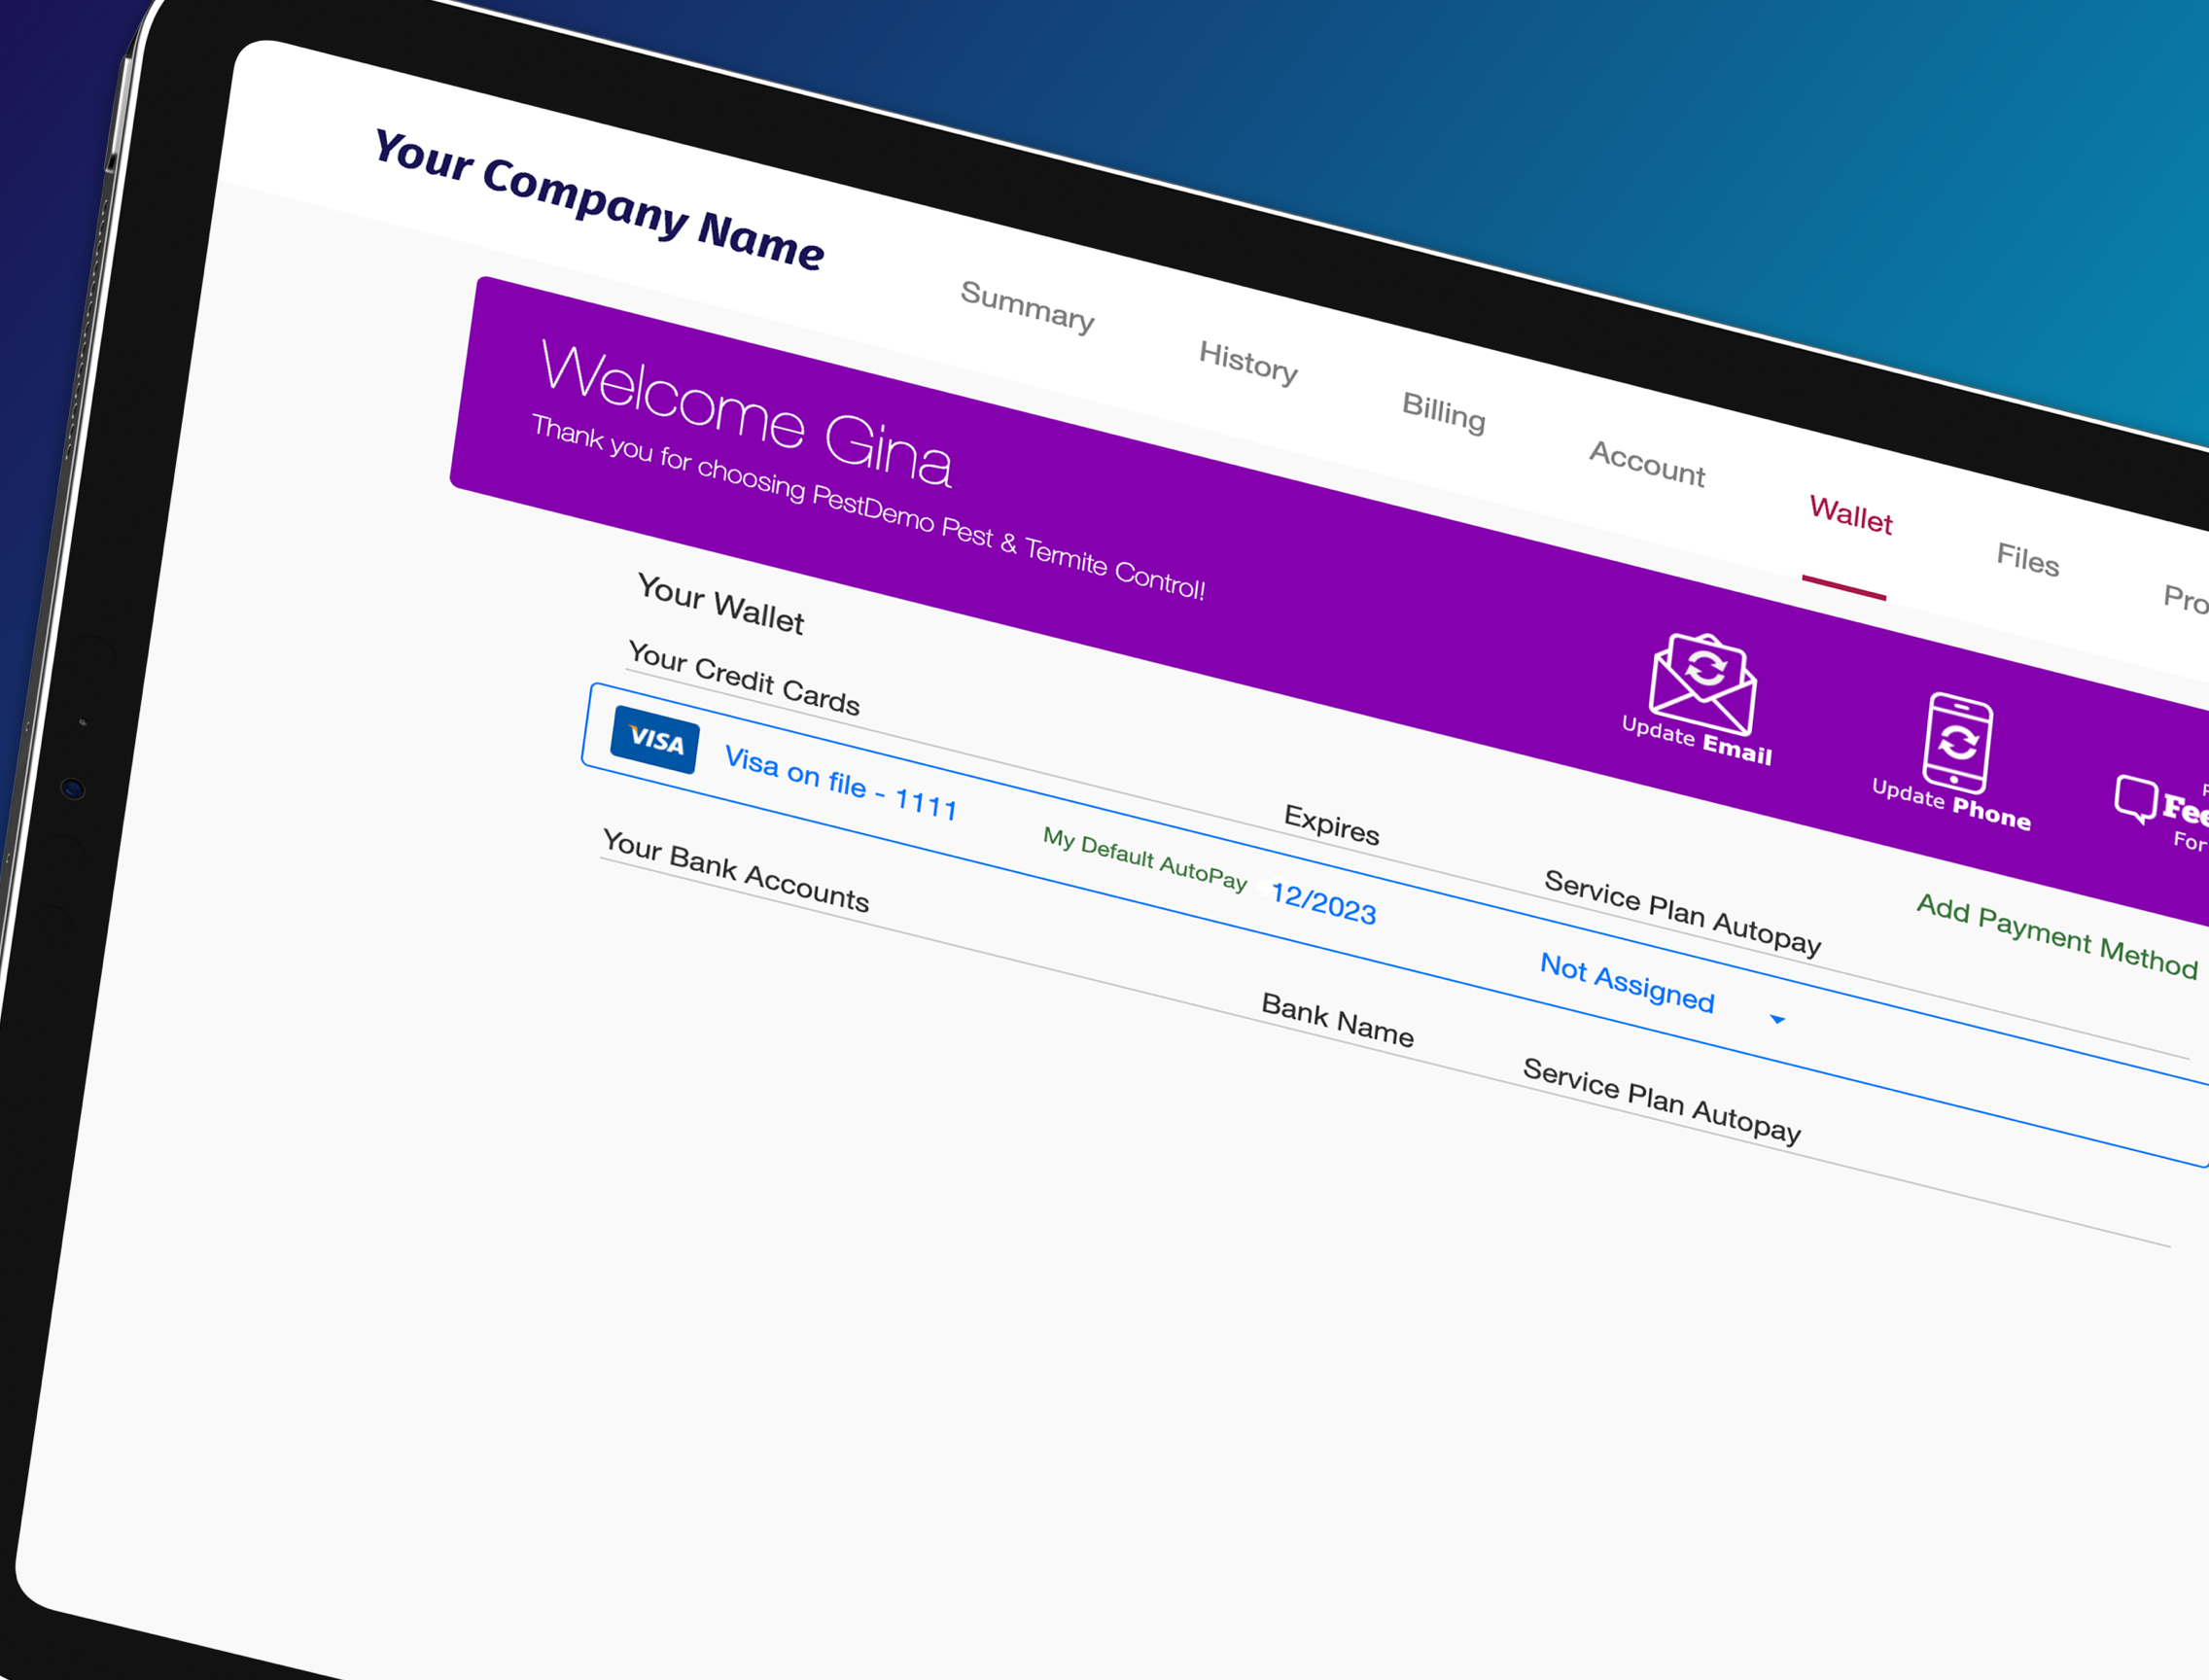 Convenient customer access through your branded Customer Portal 